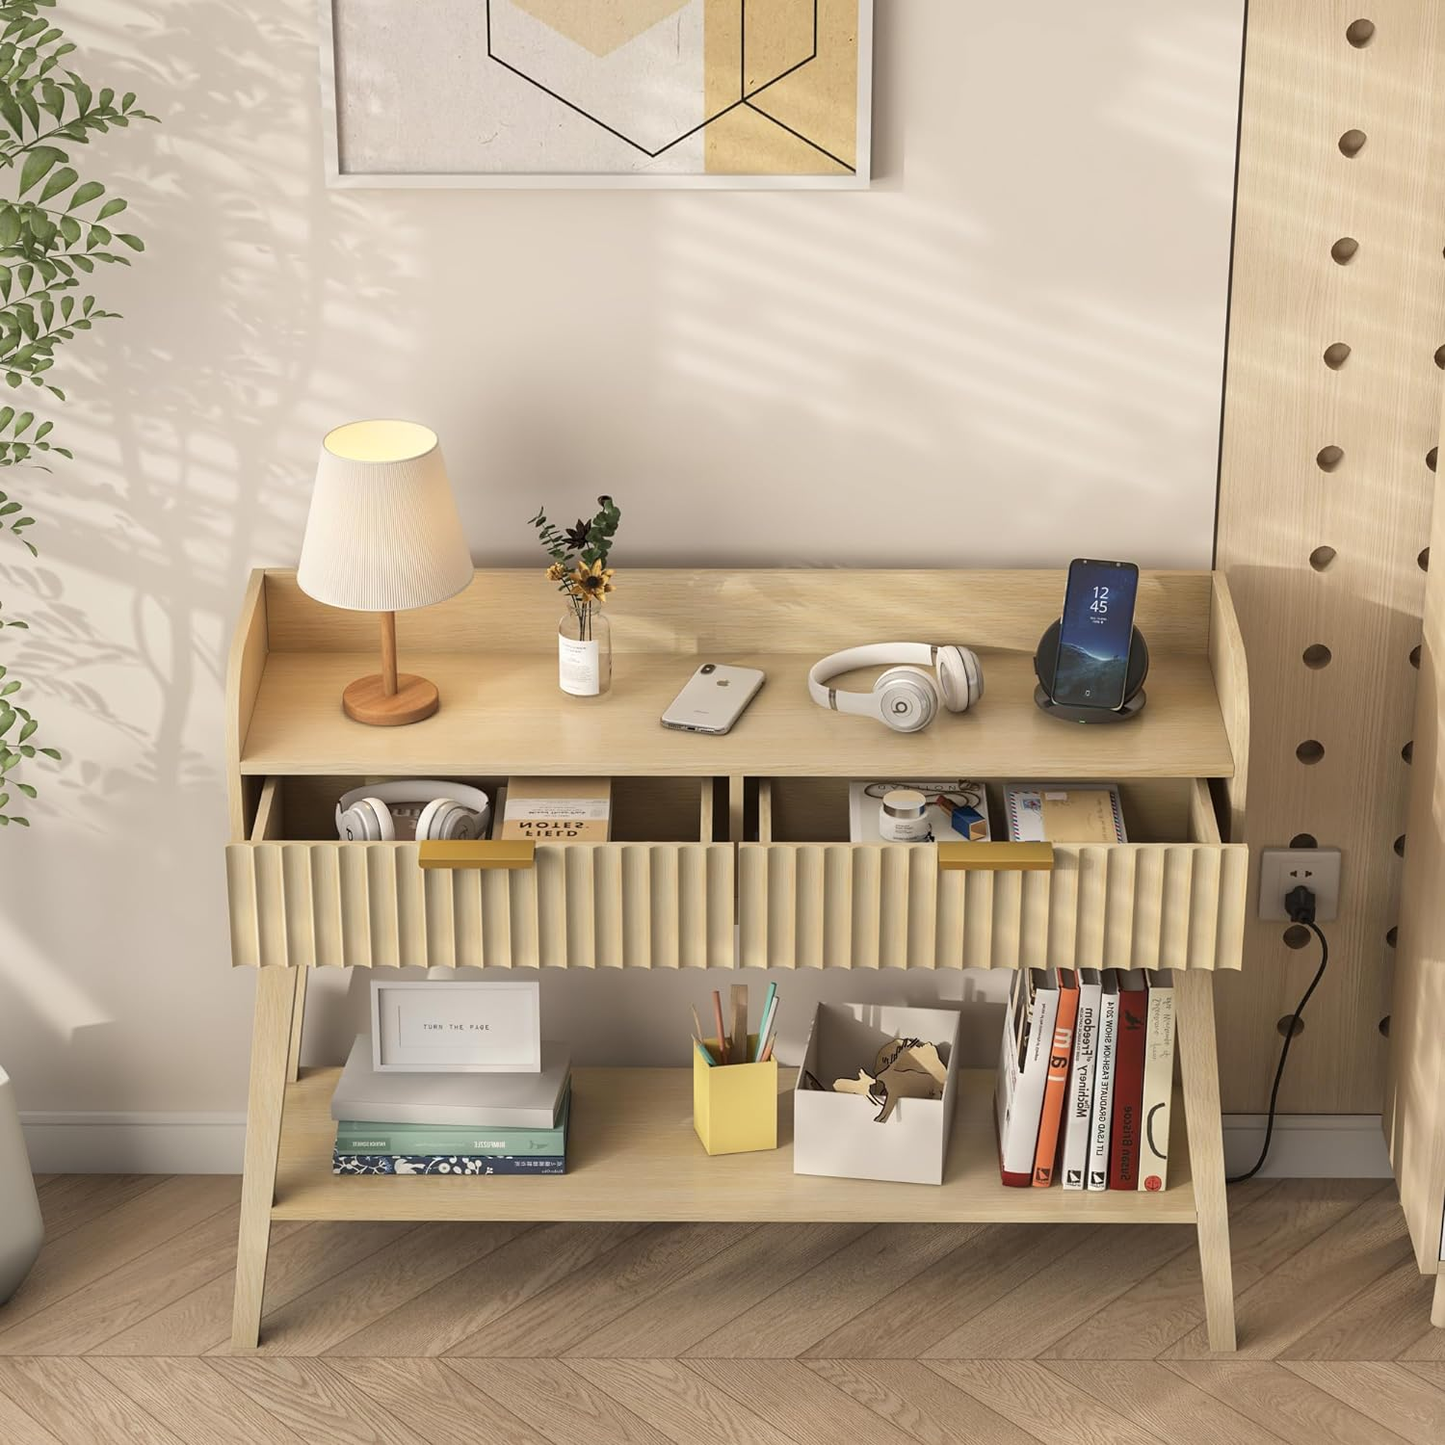 Console Table with 2 Drawers Storage, Outlets and USB Ports Charging Station